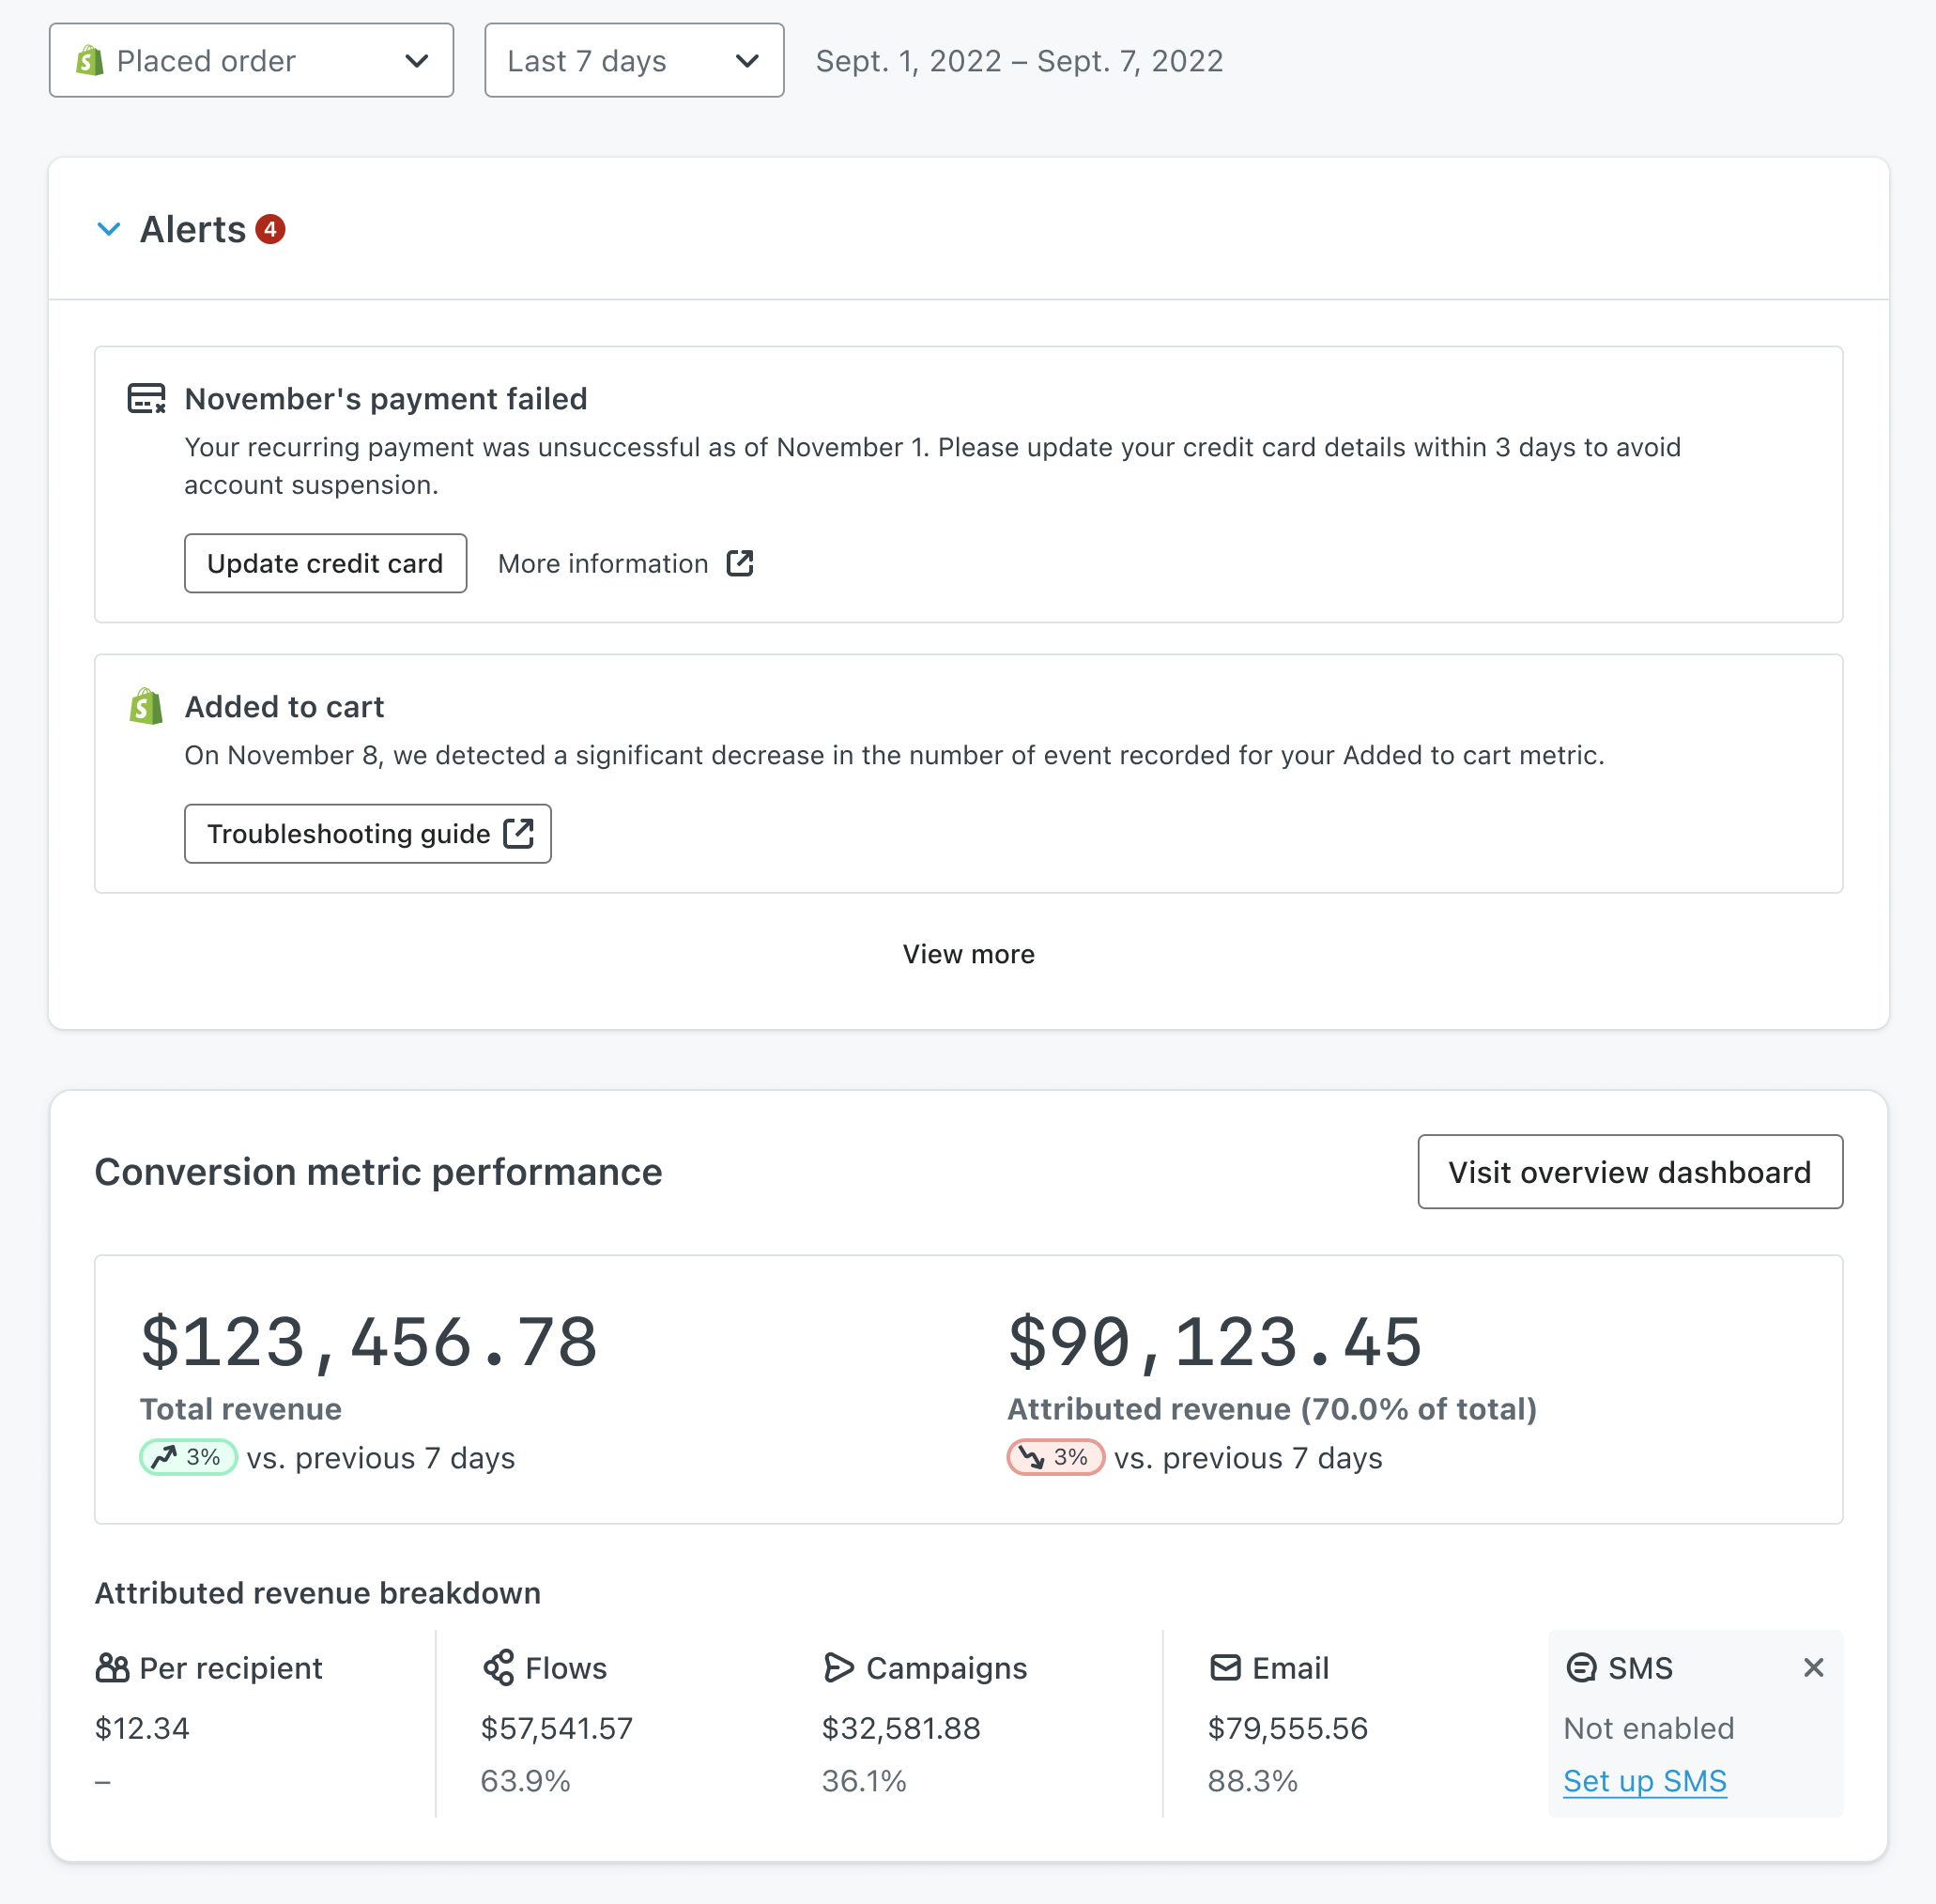 The new homepage dashboard shows key alerts and account performance